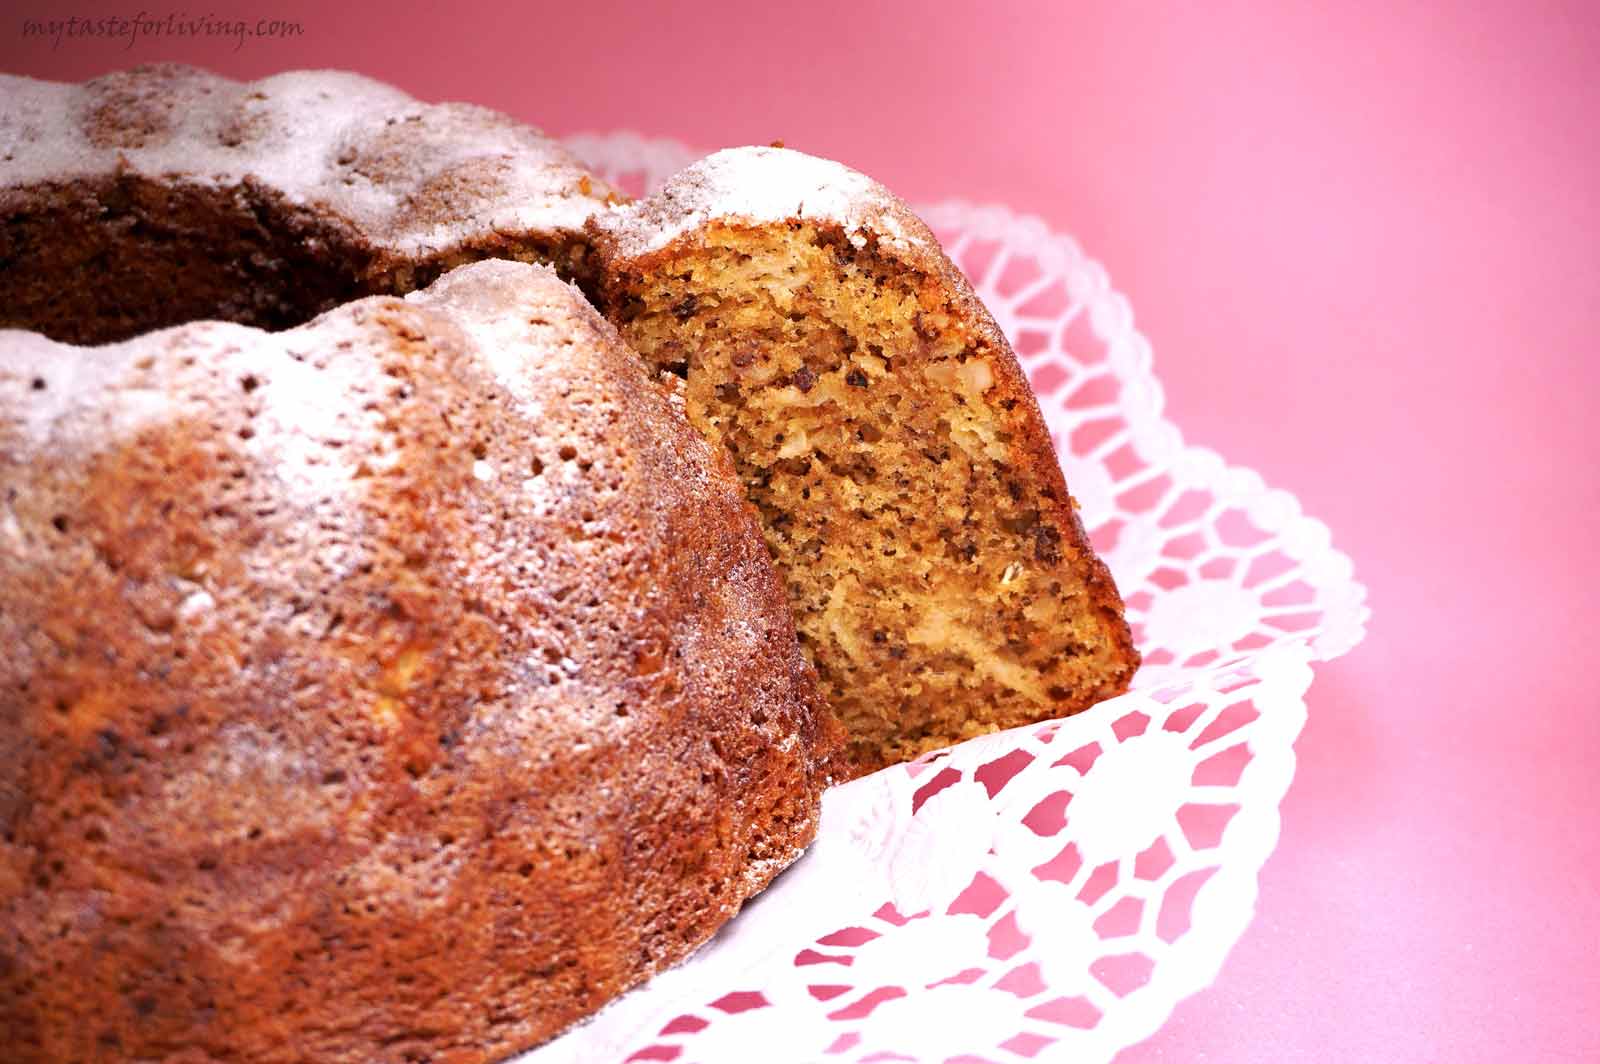 Our favorite fluffy cake made with apples, walnuts and wholemeal einkorn flour. 